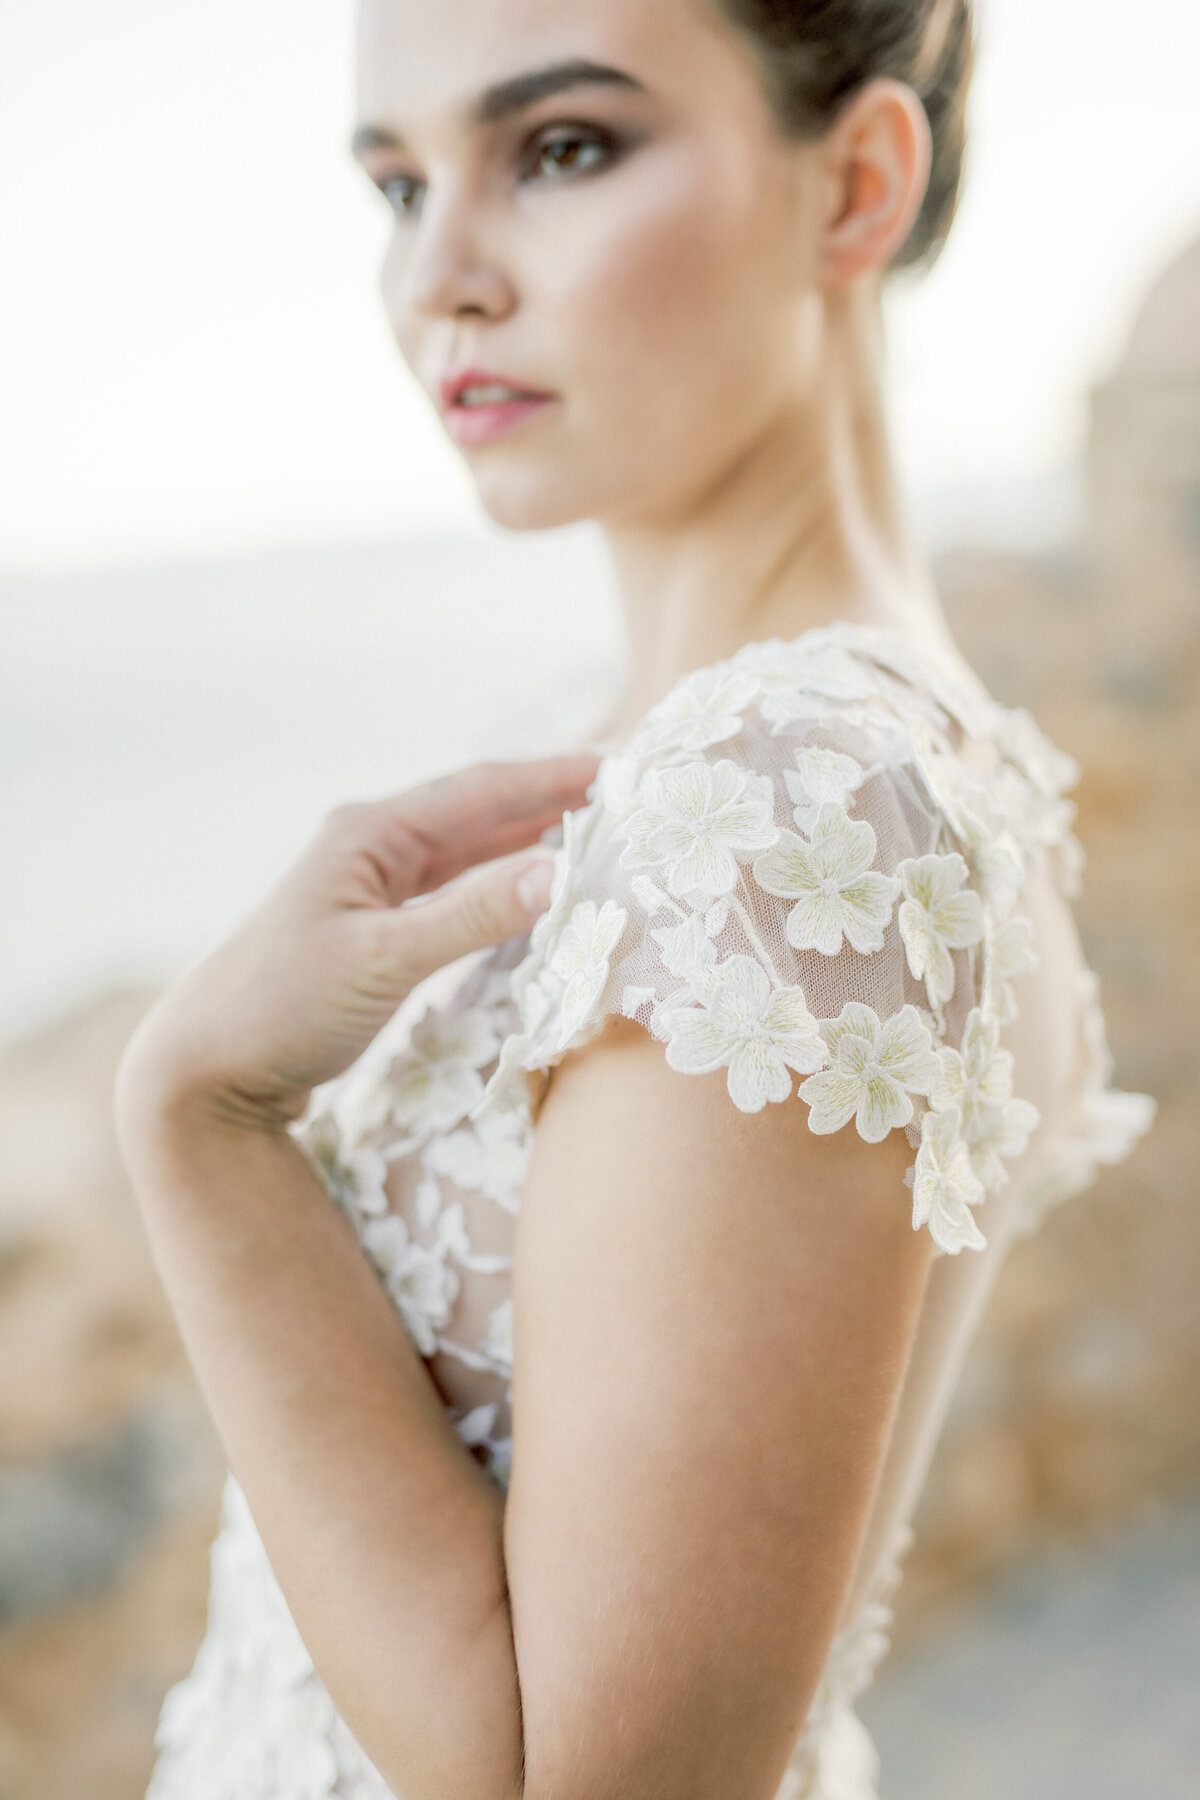 Bridal Gown Portrait Editorial Photoshoot in Greece 3